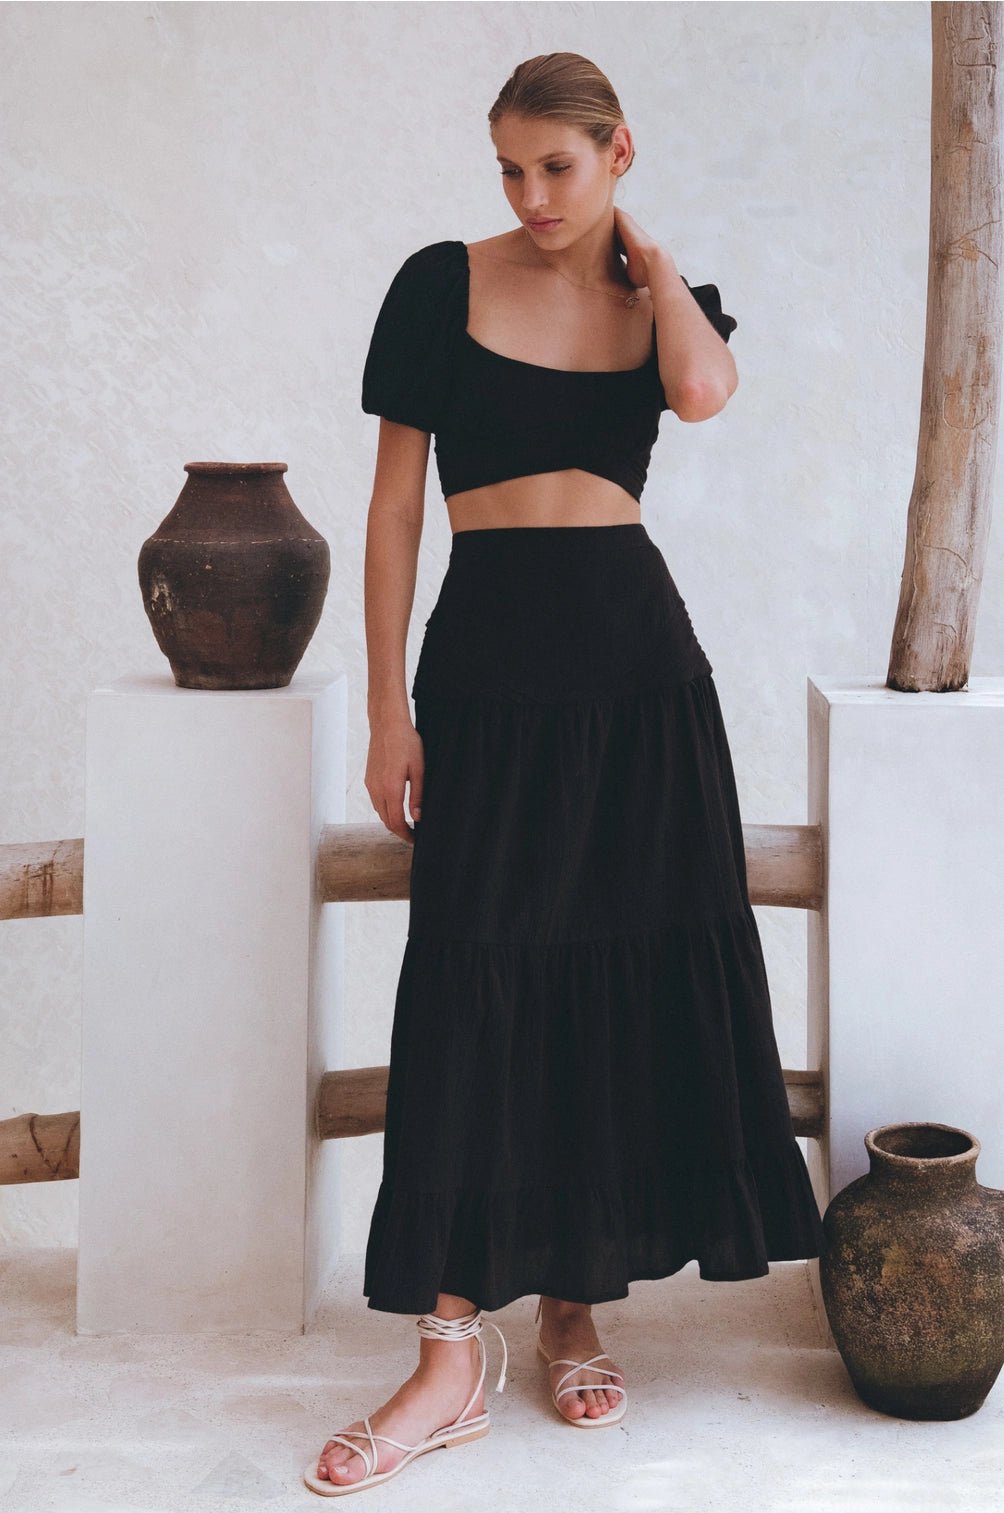 Black Casablanca Voluminous Skirt - BY THE PEOPLE SHOP | PAUSE MORE, LIVE MORE